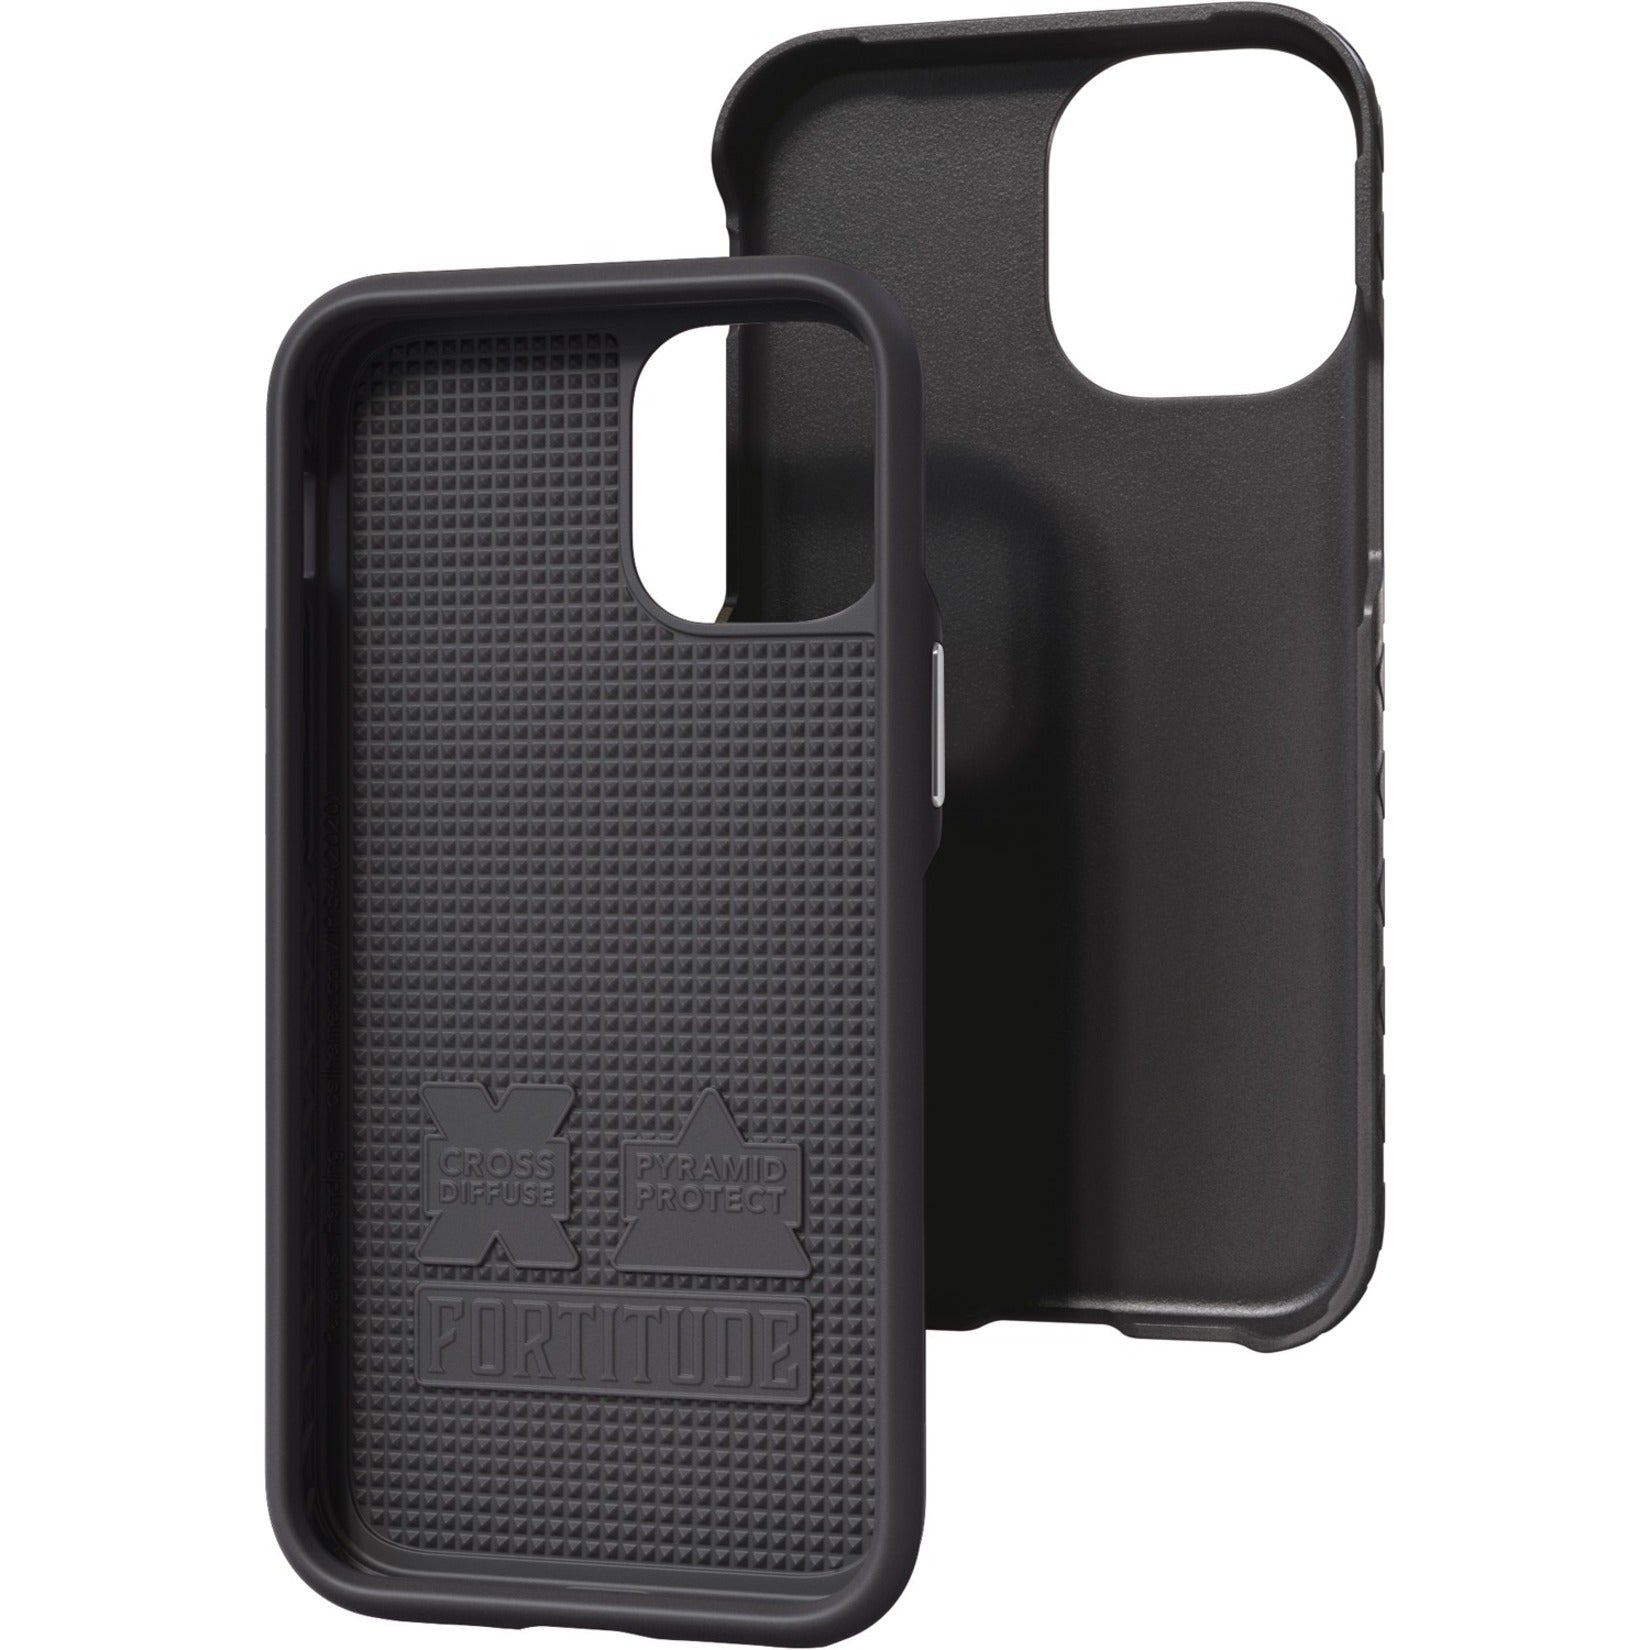 Cellhelmet C-FORT-i5.4-2020-OB Fortitude Series for iPhone 12 Mini (Onyx Black), Rugged Case with Cross Pattern